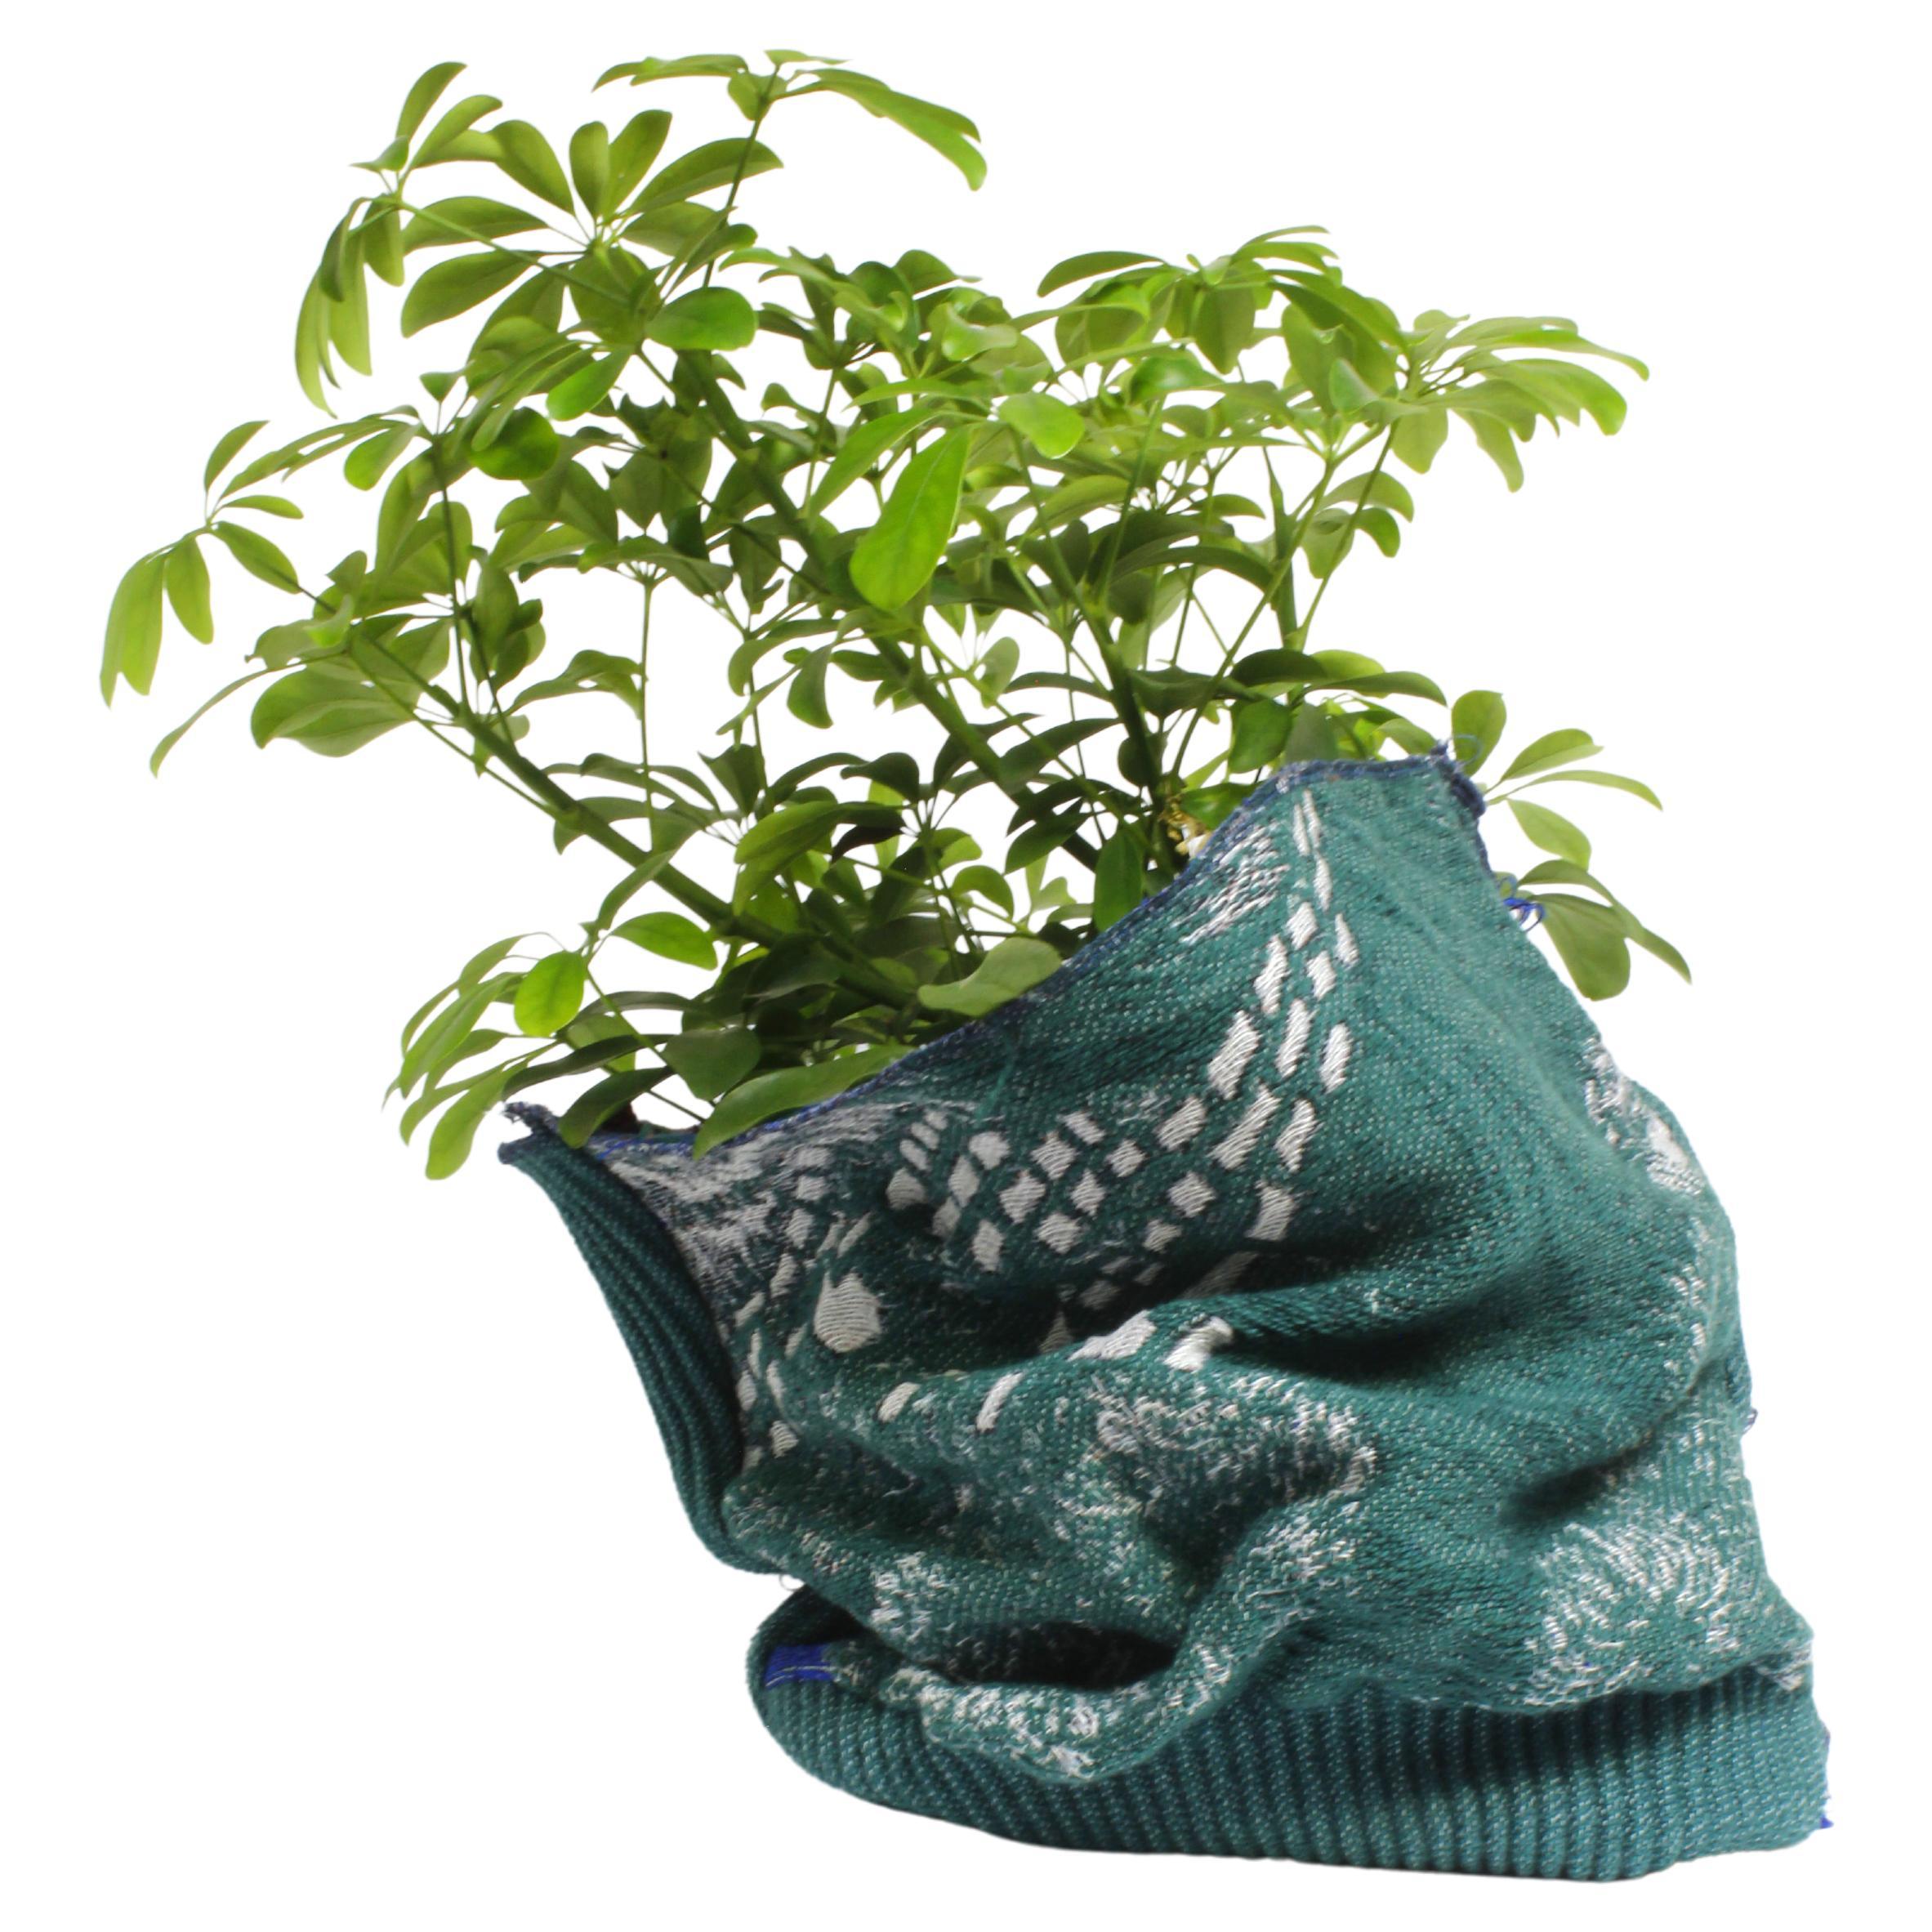 Planter hider woven textile elastic pocket based on a drawing For Sale